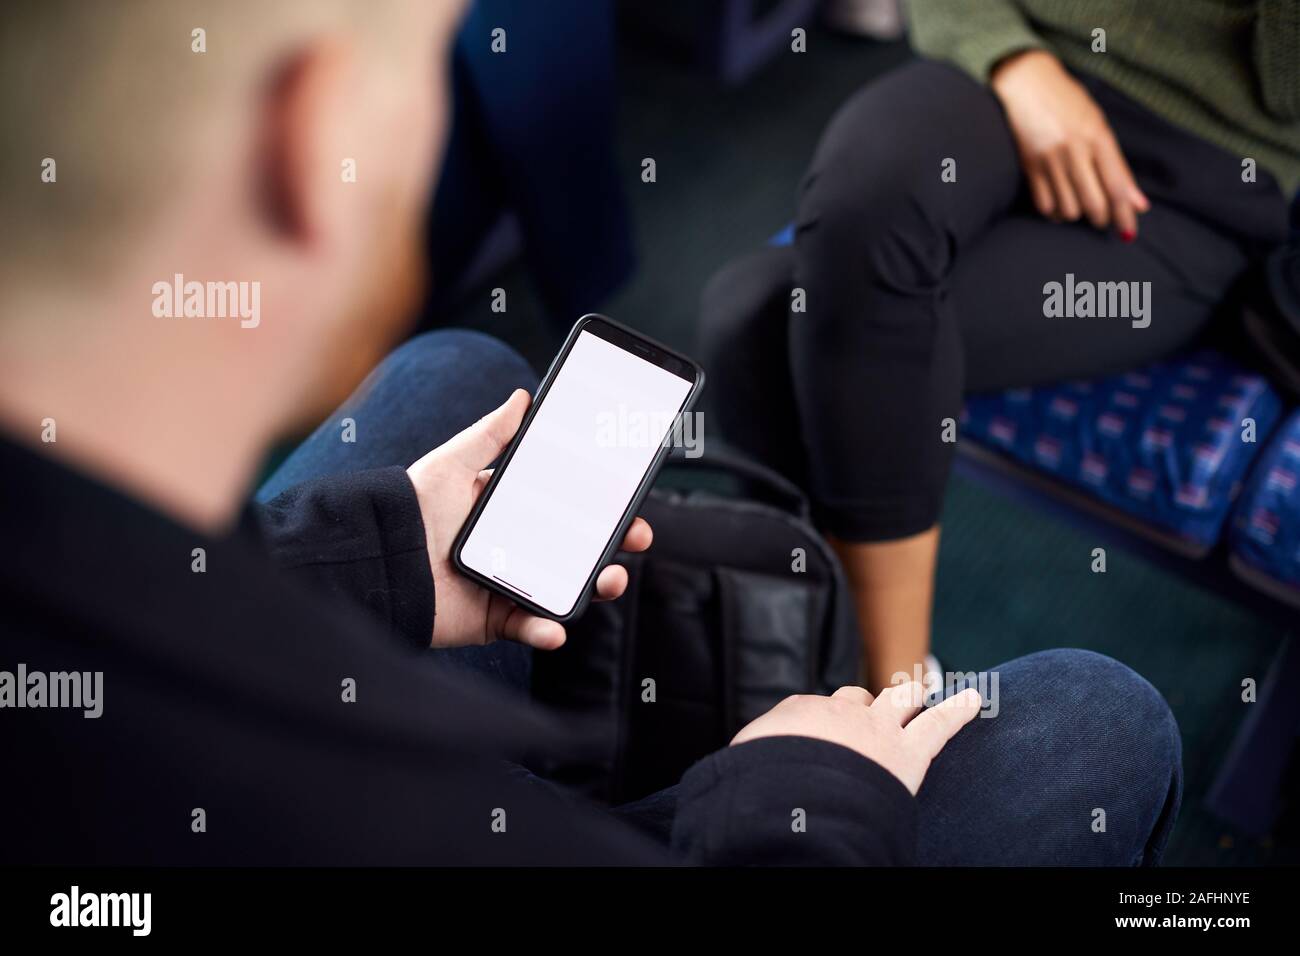 Close Up Of Male Passenger Sitting In Train With Digital Ticket On Mobile Phone Stock Photo